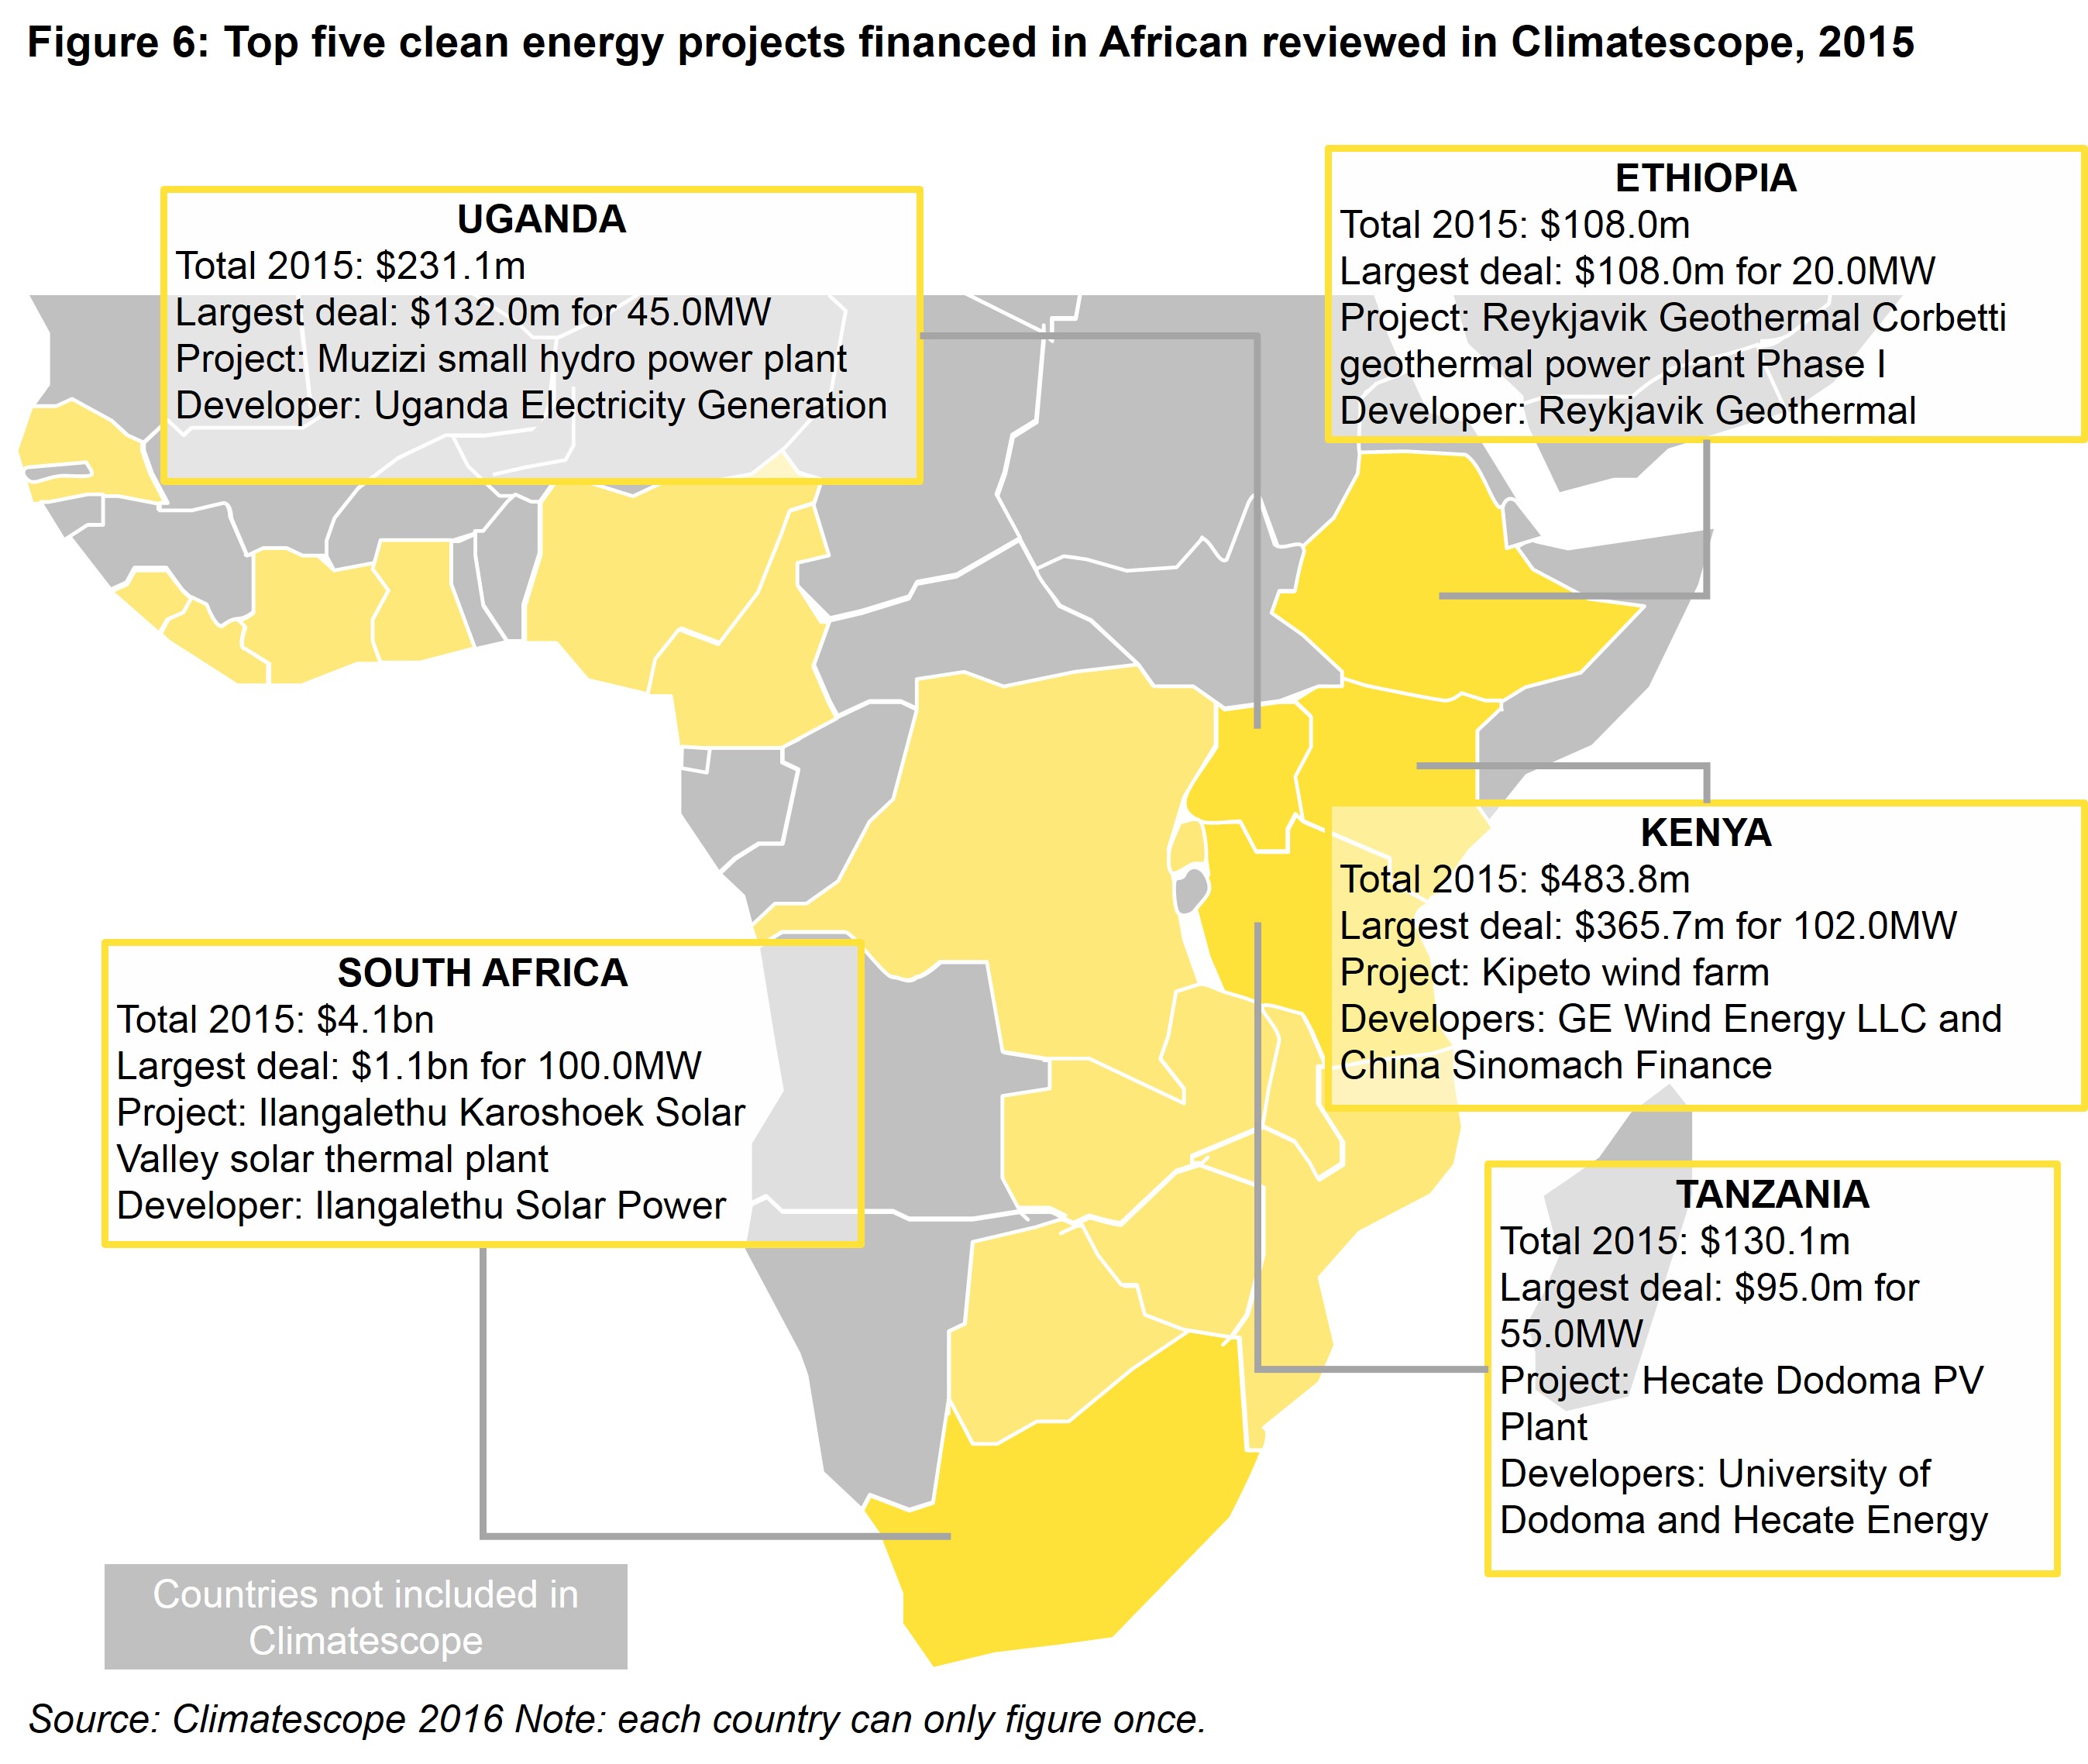 AM Fig 6 - Top five 2015 clean energy project financings in Sub-Saharan African countries reviewed by Climatescope